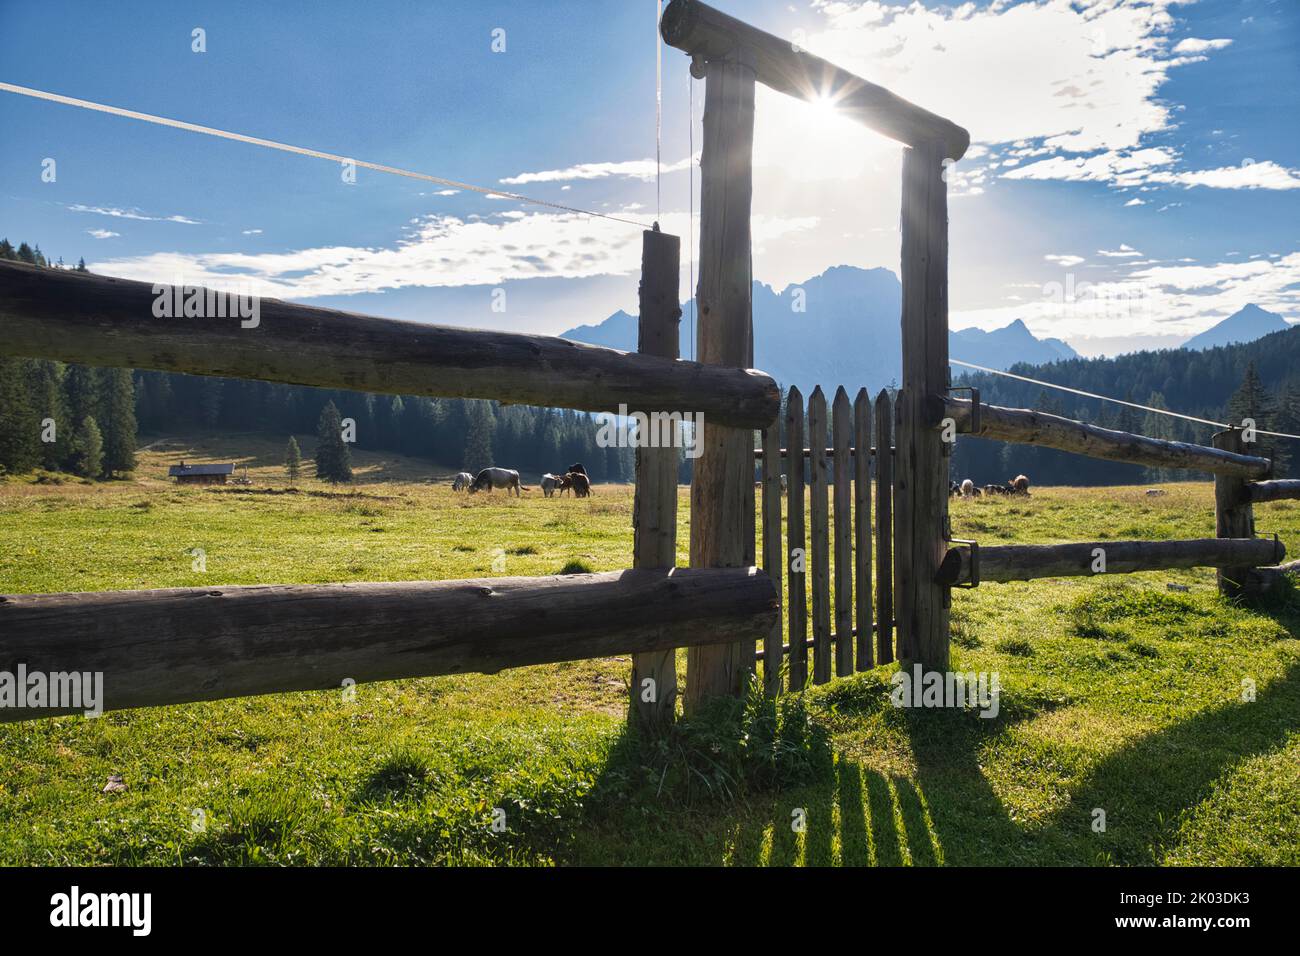 Italy, Veneto, province of Belluno, Cortina d' Ampezzo. Wooden fence closed by a gate, filtered sun and shadows on the green lawn Stock Photo